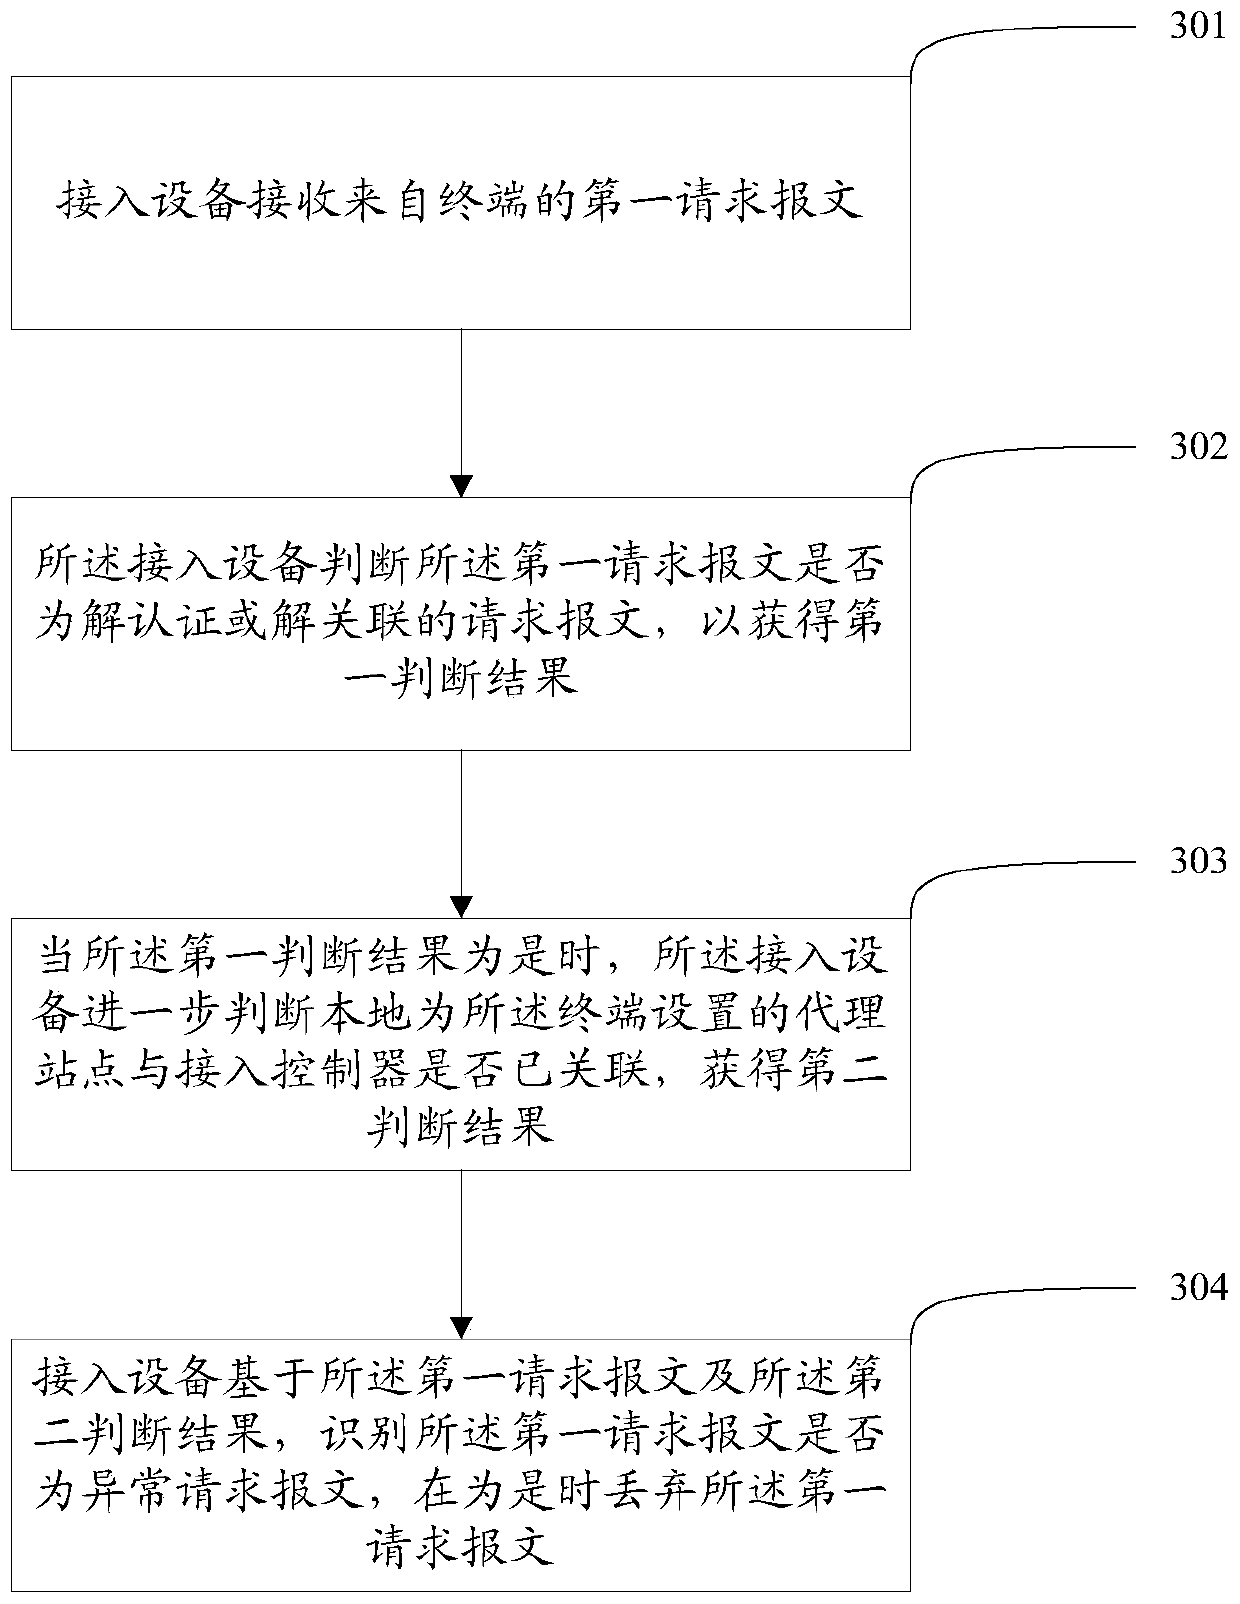 A security management method and access device